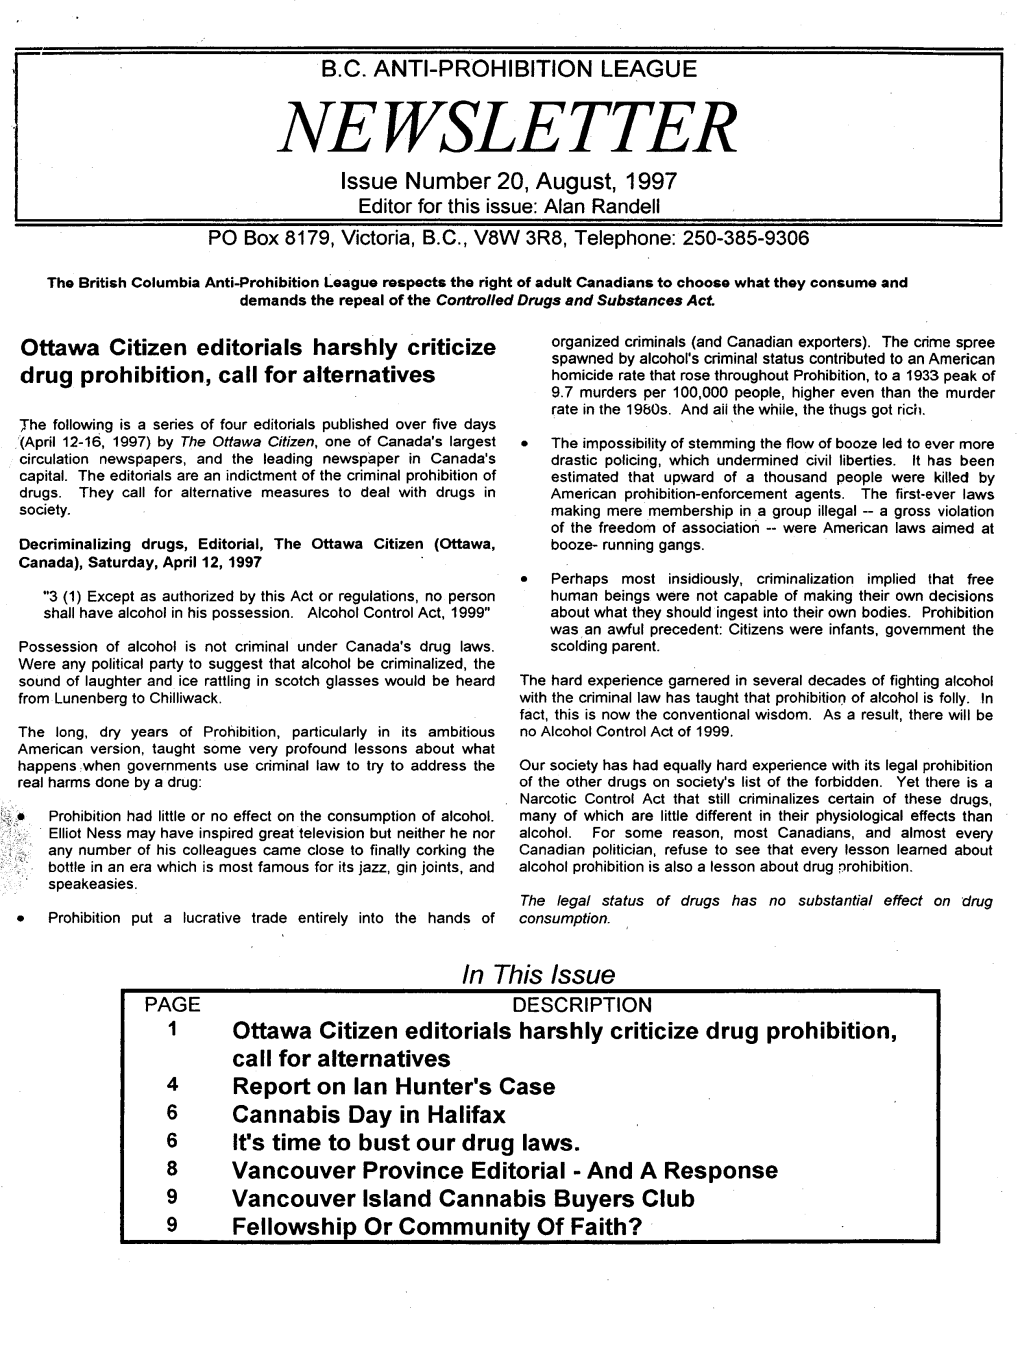 NEWSLETTER Issue Number 20, August, 1997 Editor for This Issue: Alan Randell PO Box 8179, Victoria, B.C., V8W 3R8, Telephone: 250-385-9306